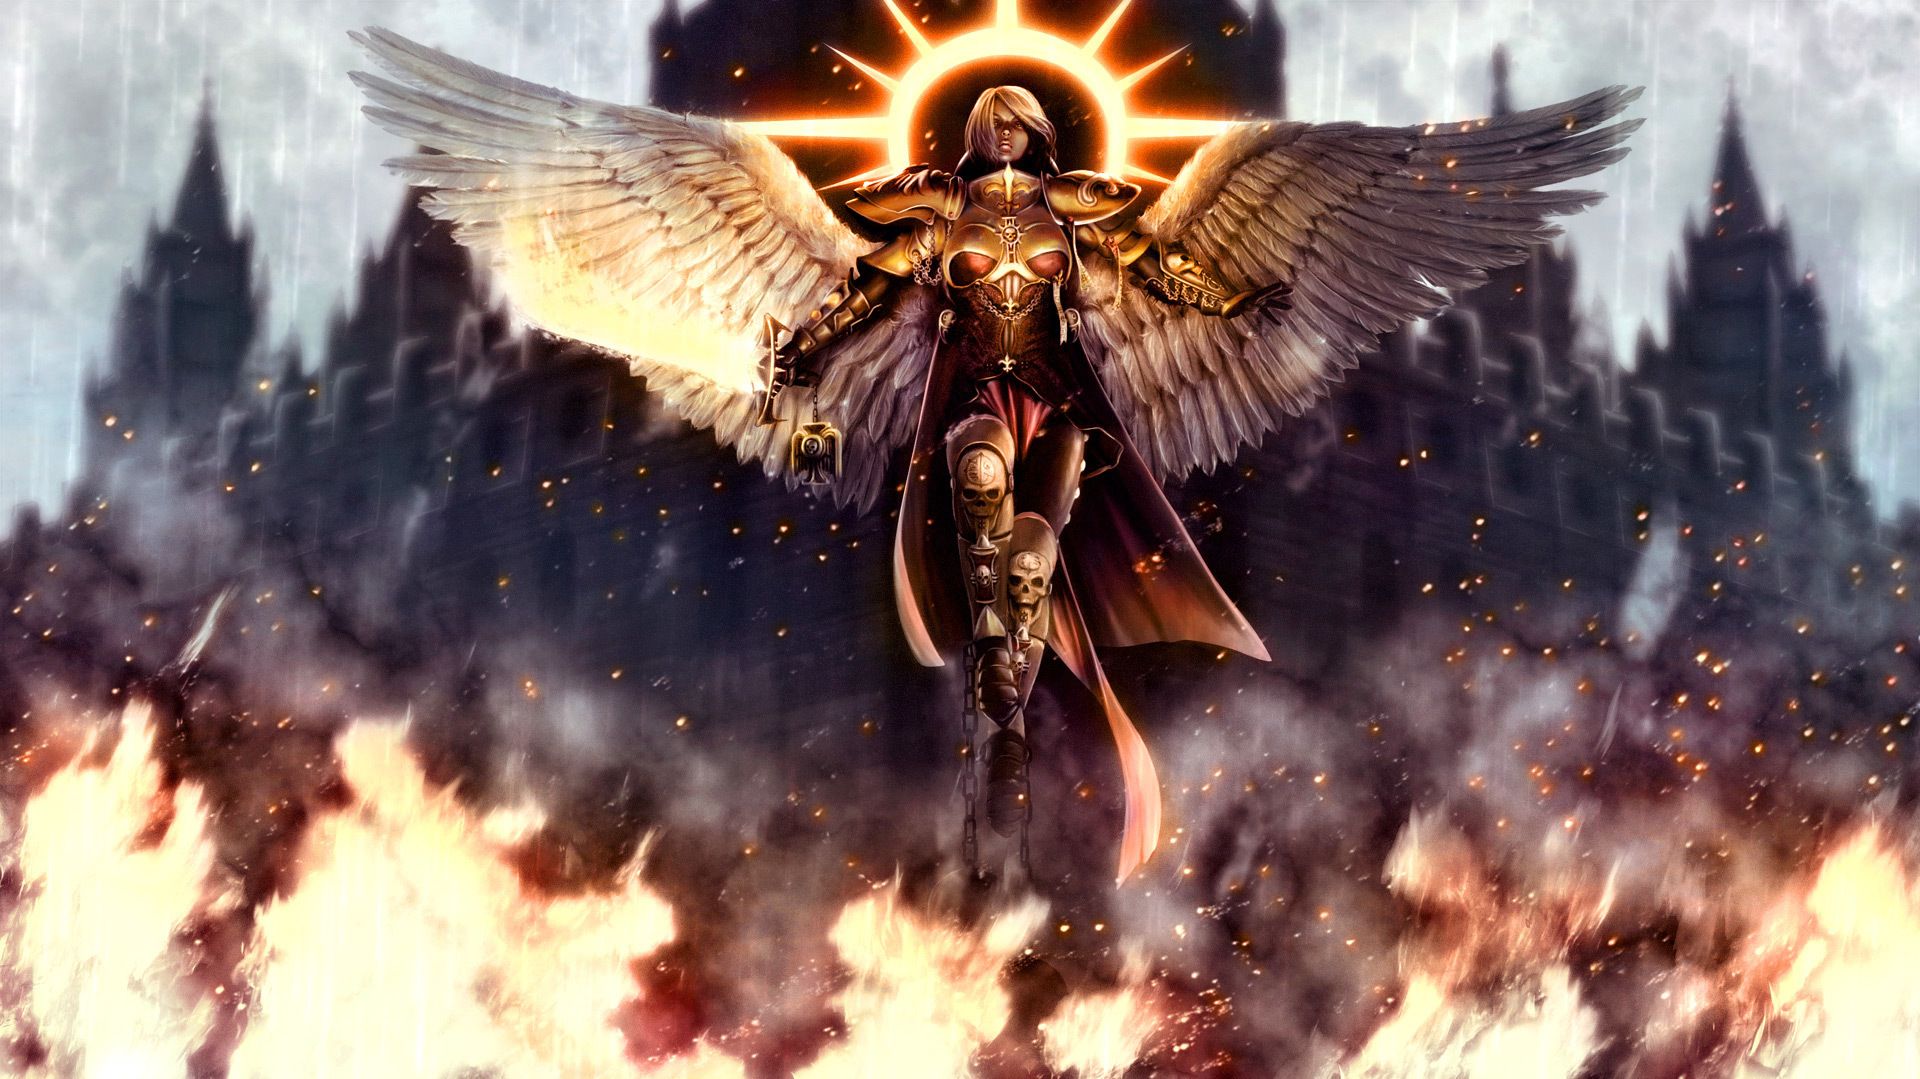 Winged Angel with Halo and Sword Flying .wallpaperose.com